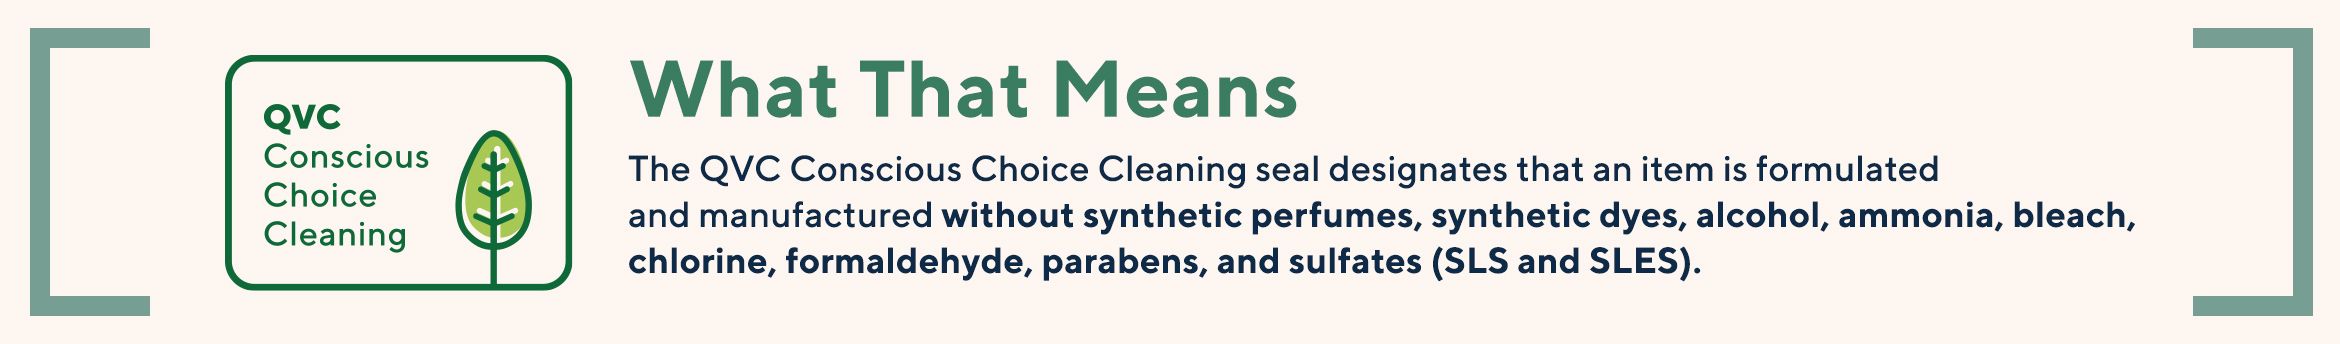 What That Means The QVC Conscious Choice Cleaning seal designates that an item is formulated and manufactured without synthetic perfumes, synthetic dyes, alcohol, ammonia, bleach, chlorine, formaldehyde, parabens, and sulfates (SLS and SLES).